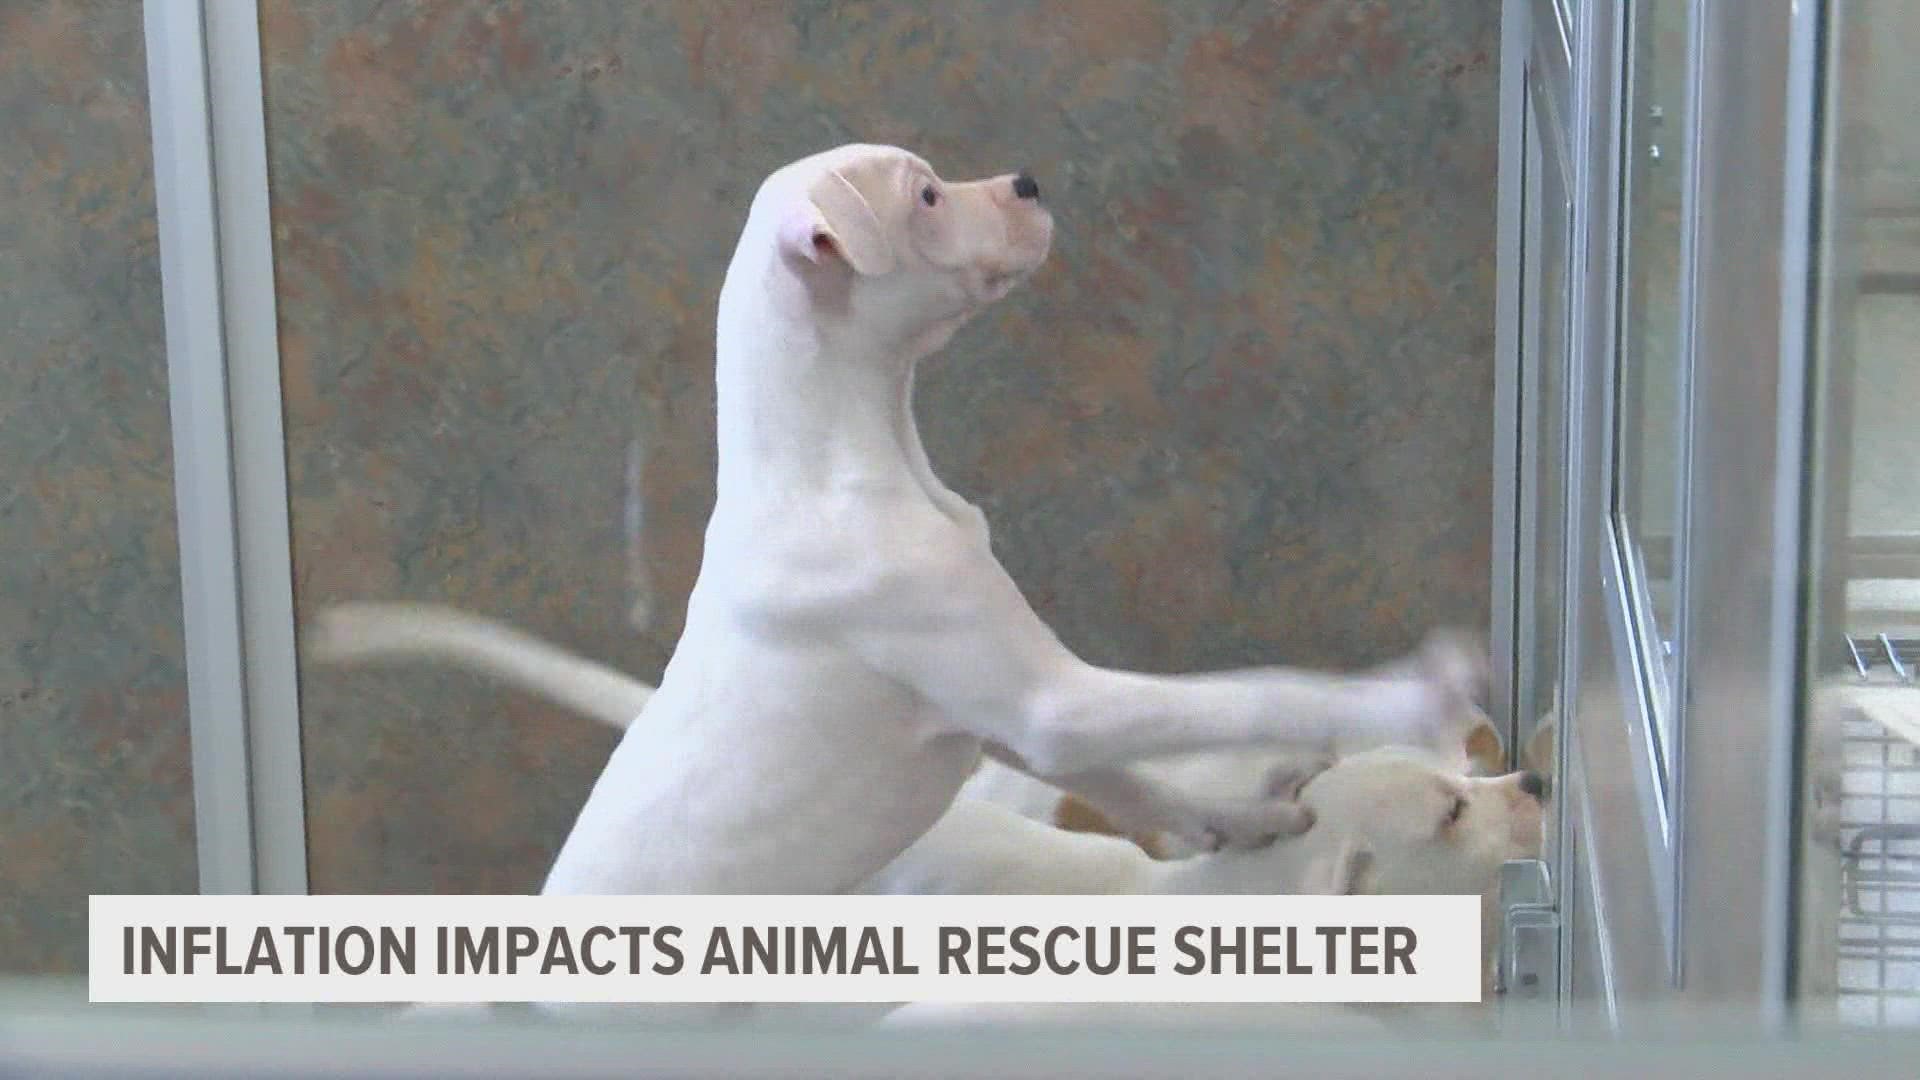 Amy Heinz of AHeinz 57 Pet Rescue & Transport shares how inflation is impacting her shelter.